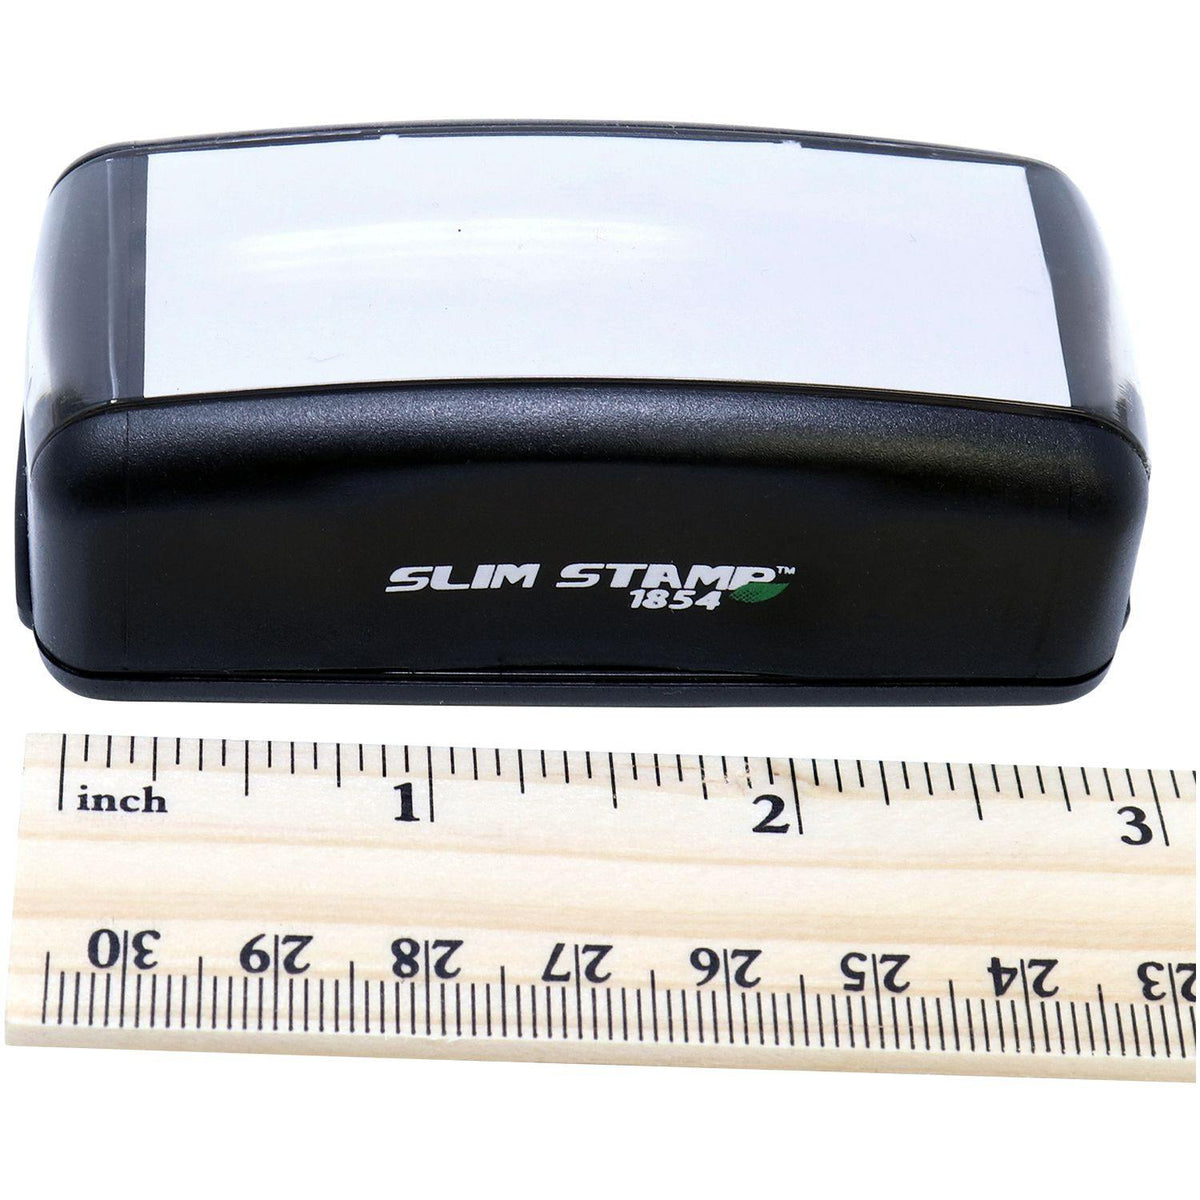 Measurement Large Pre-Inked Insured Stamp with Ruler